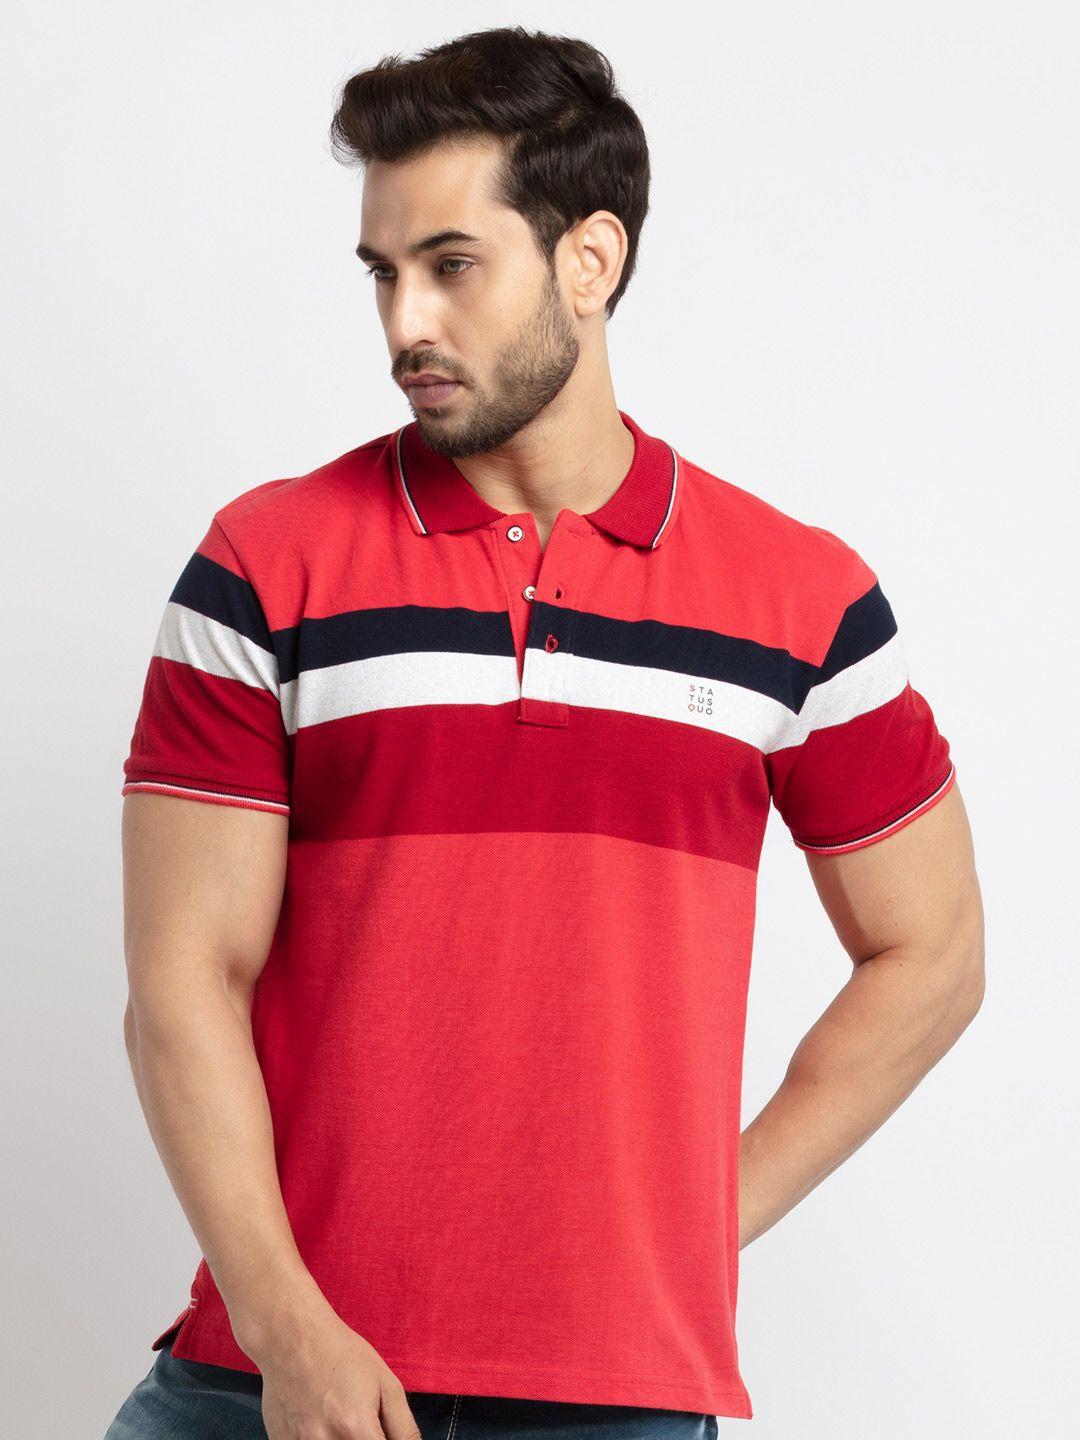 status quo men coral & maroon striped polo collar t-shirt